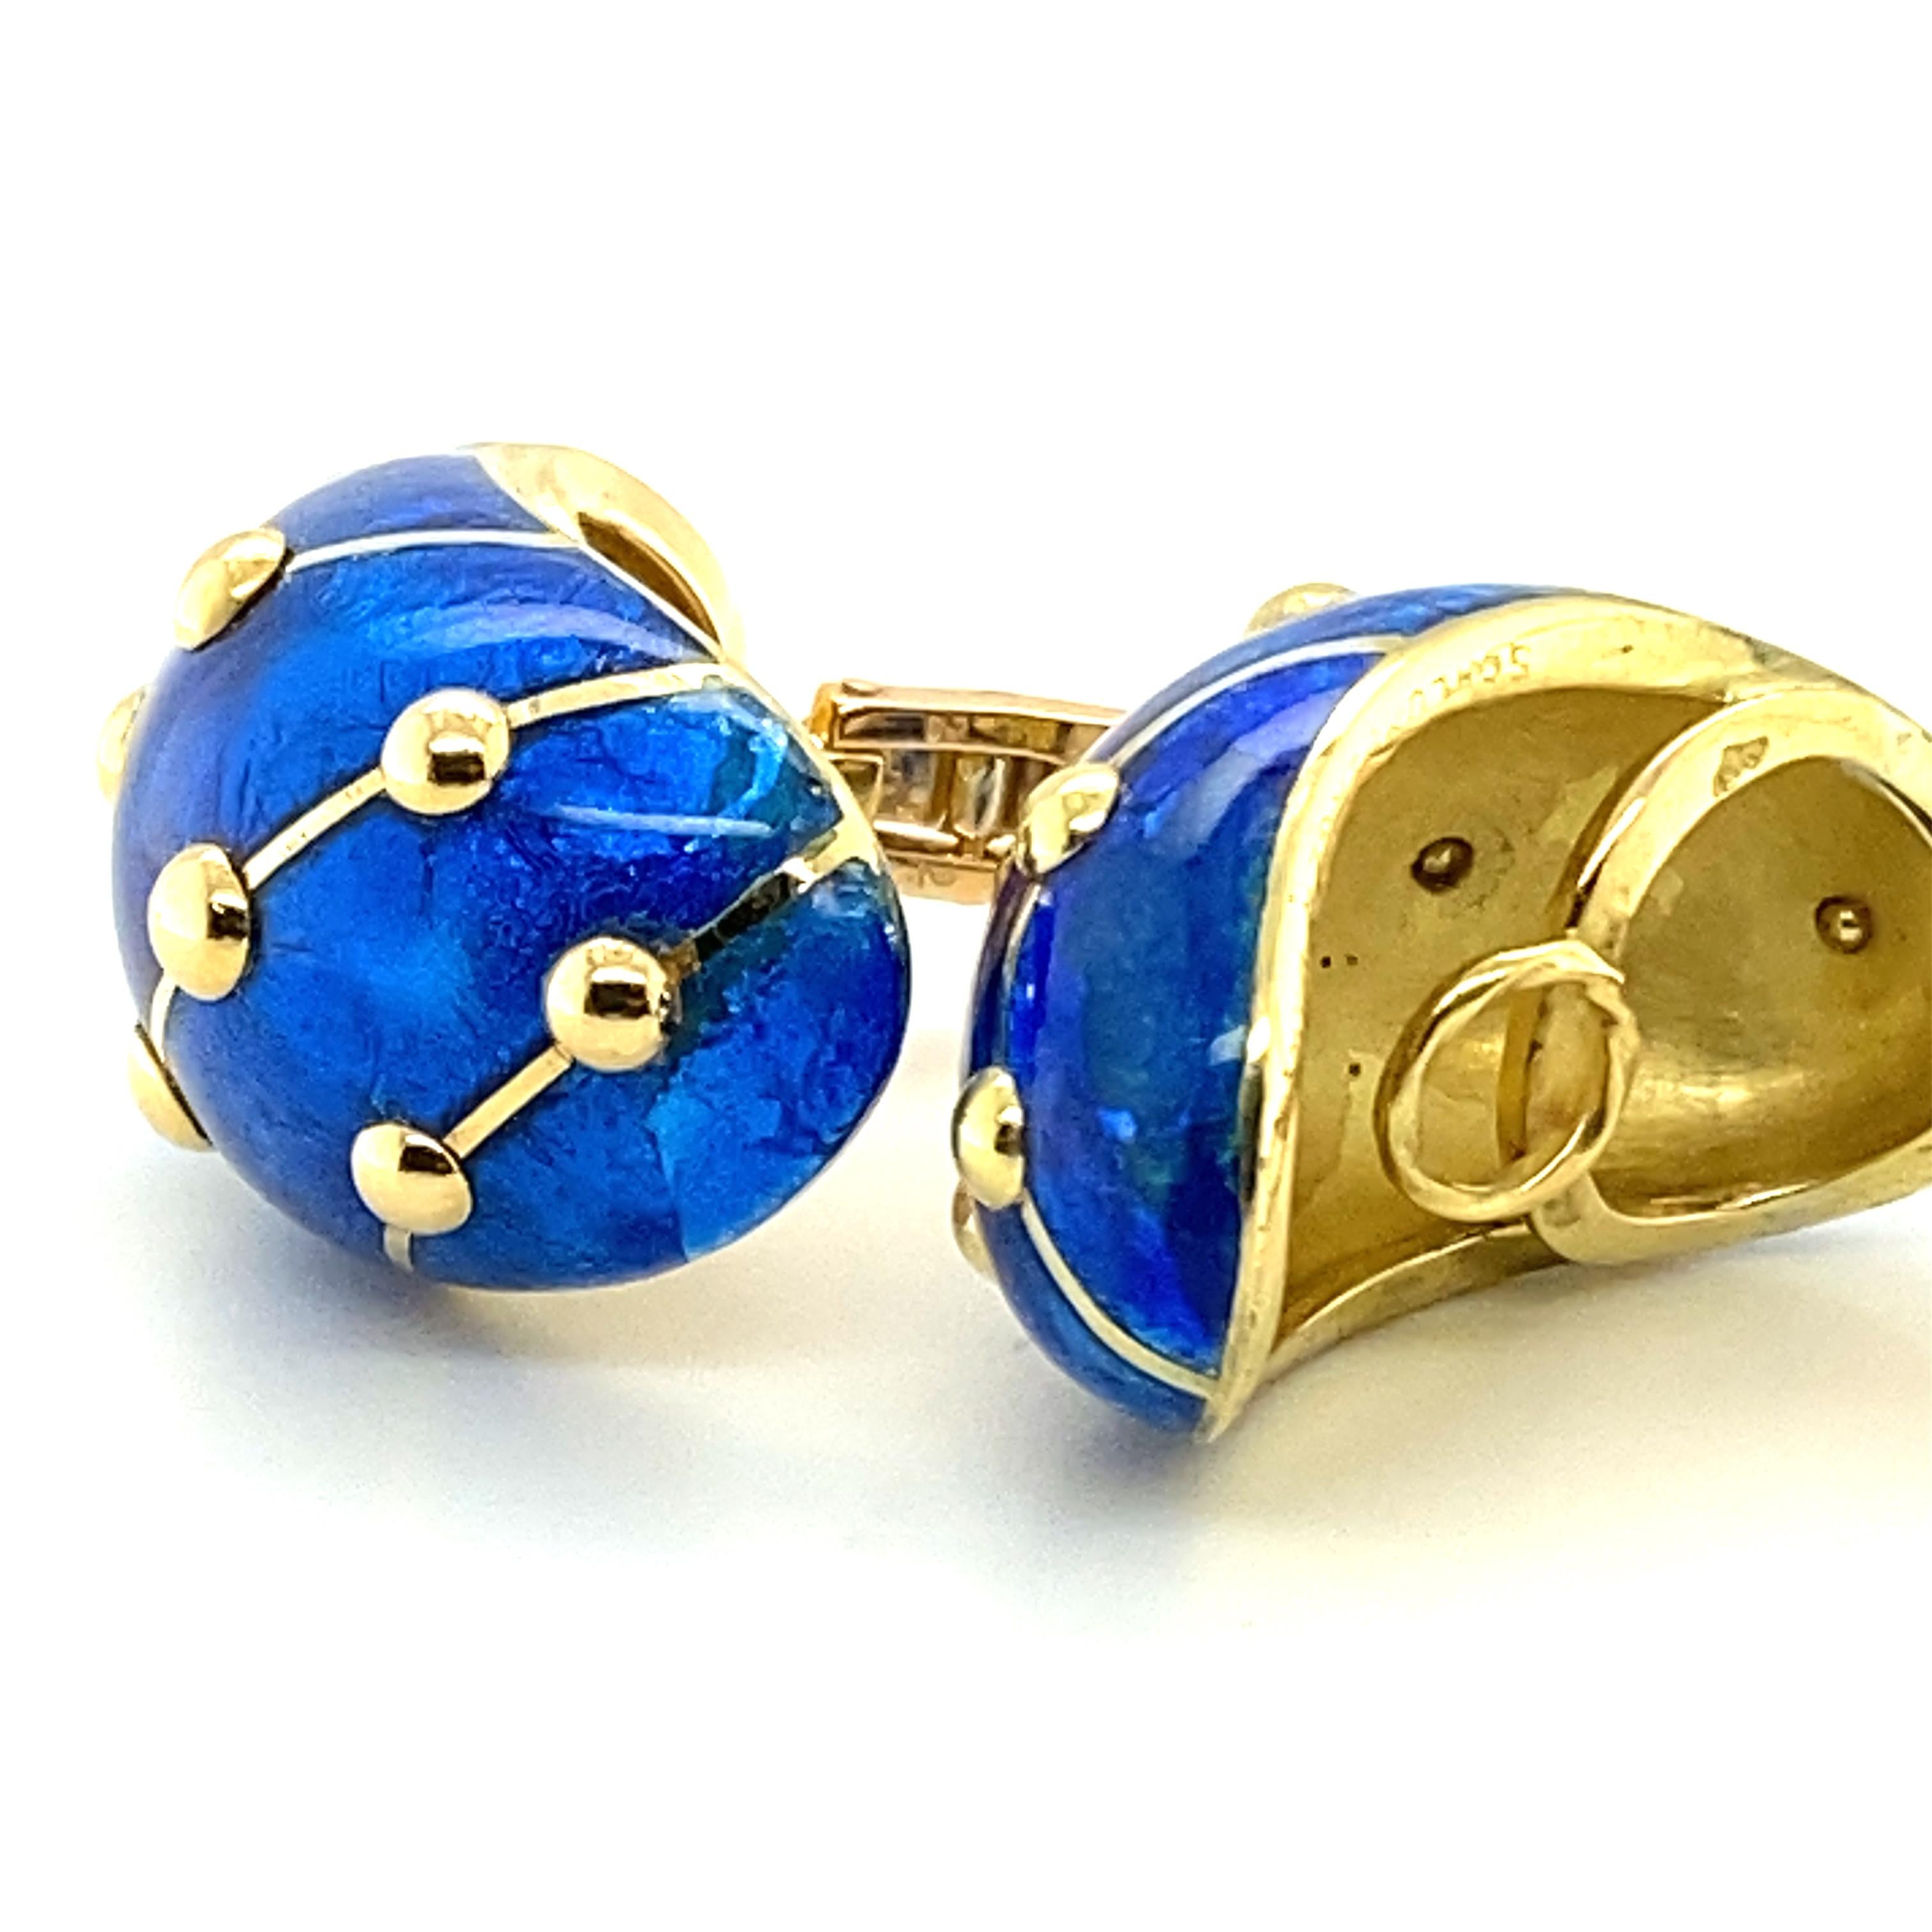 Pair of Gold and Blue Paillonné Enamel 'Banana' Earrings by Jean Schlumberger 6